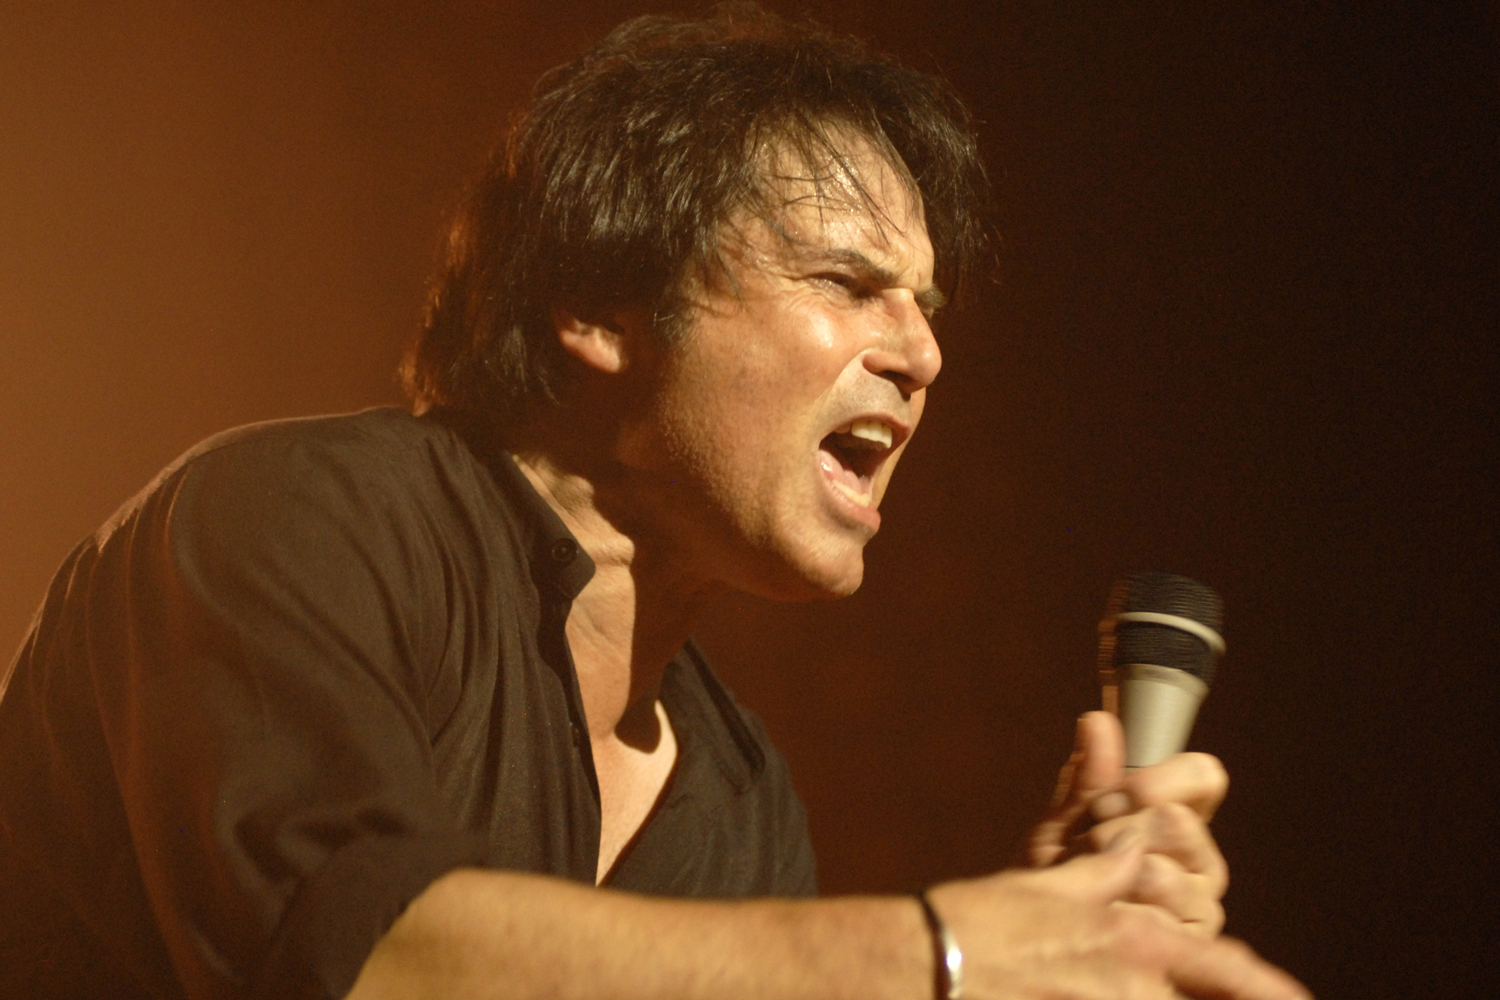 Jimi Jamison performing in Nashville, Tennessee, in 2009.